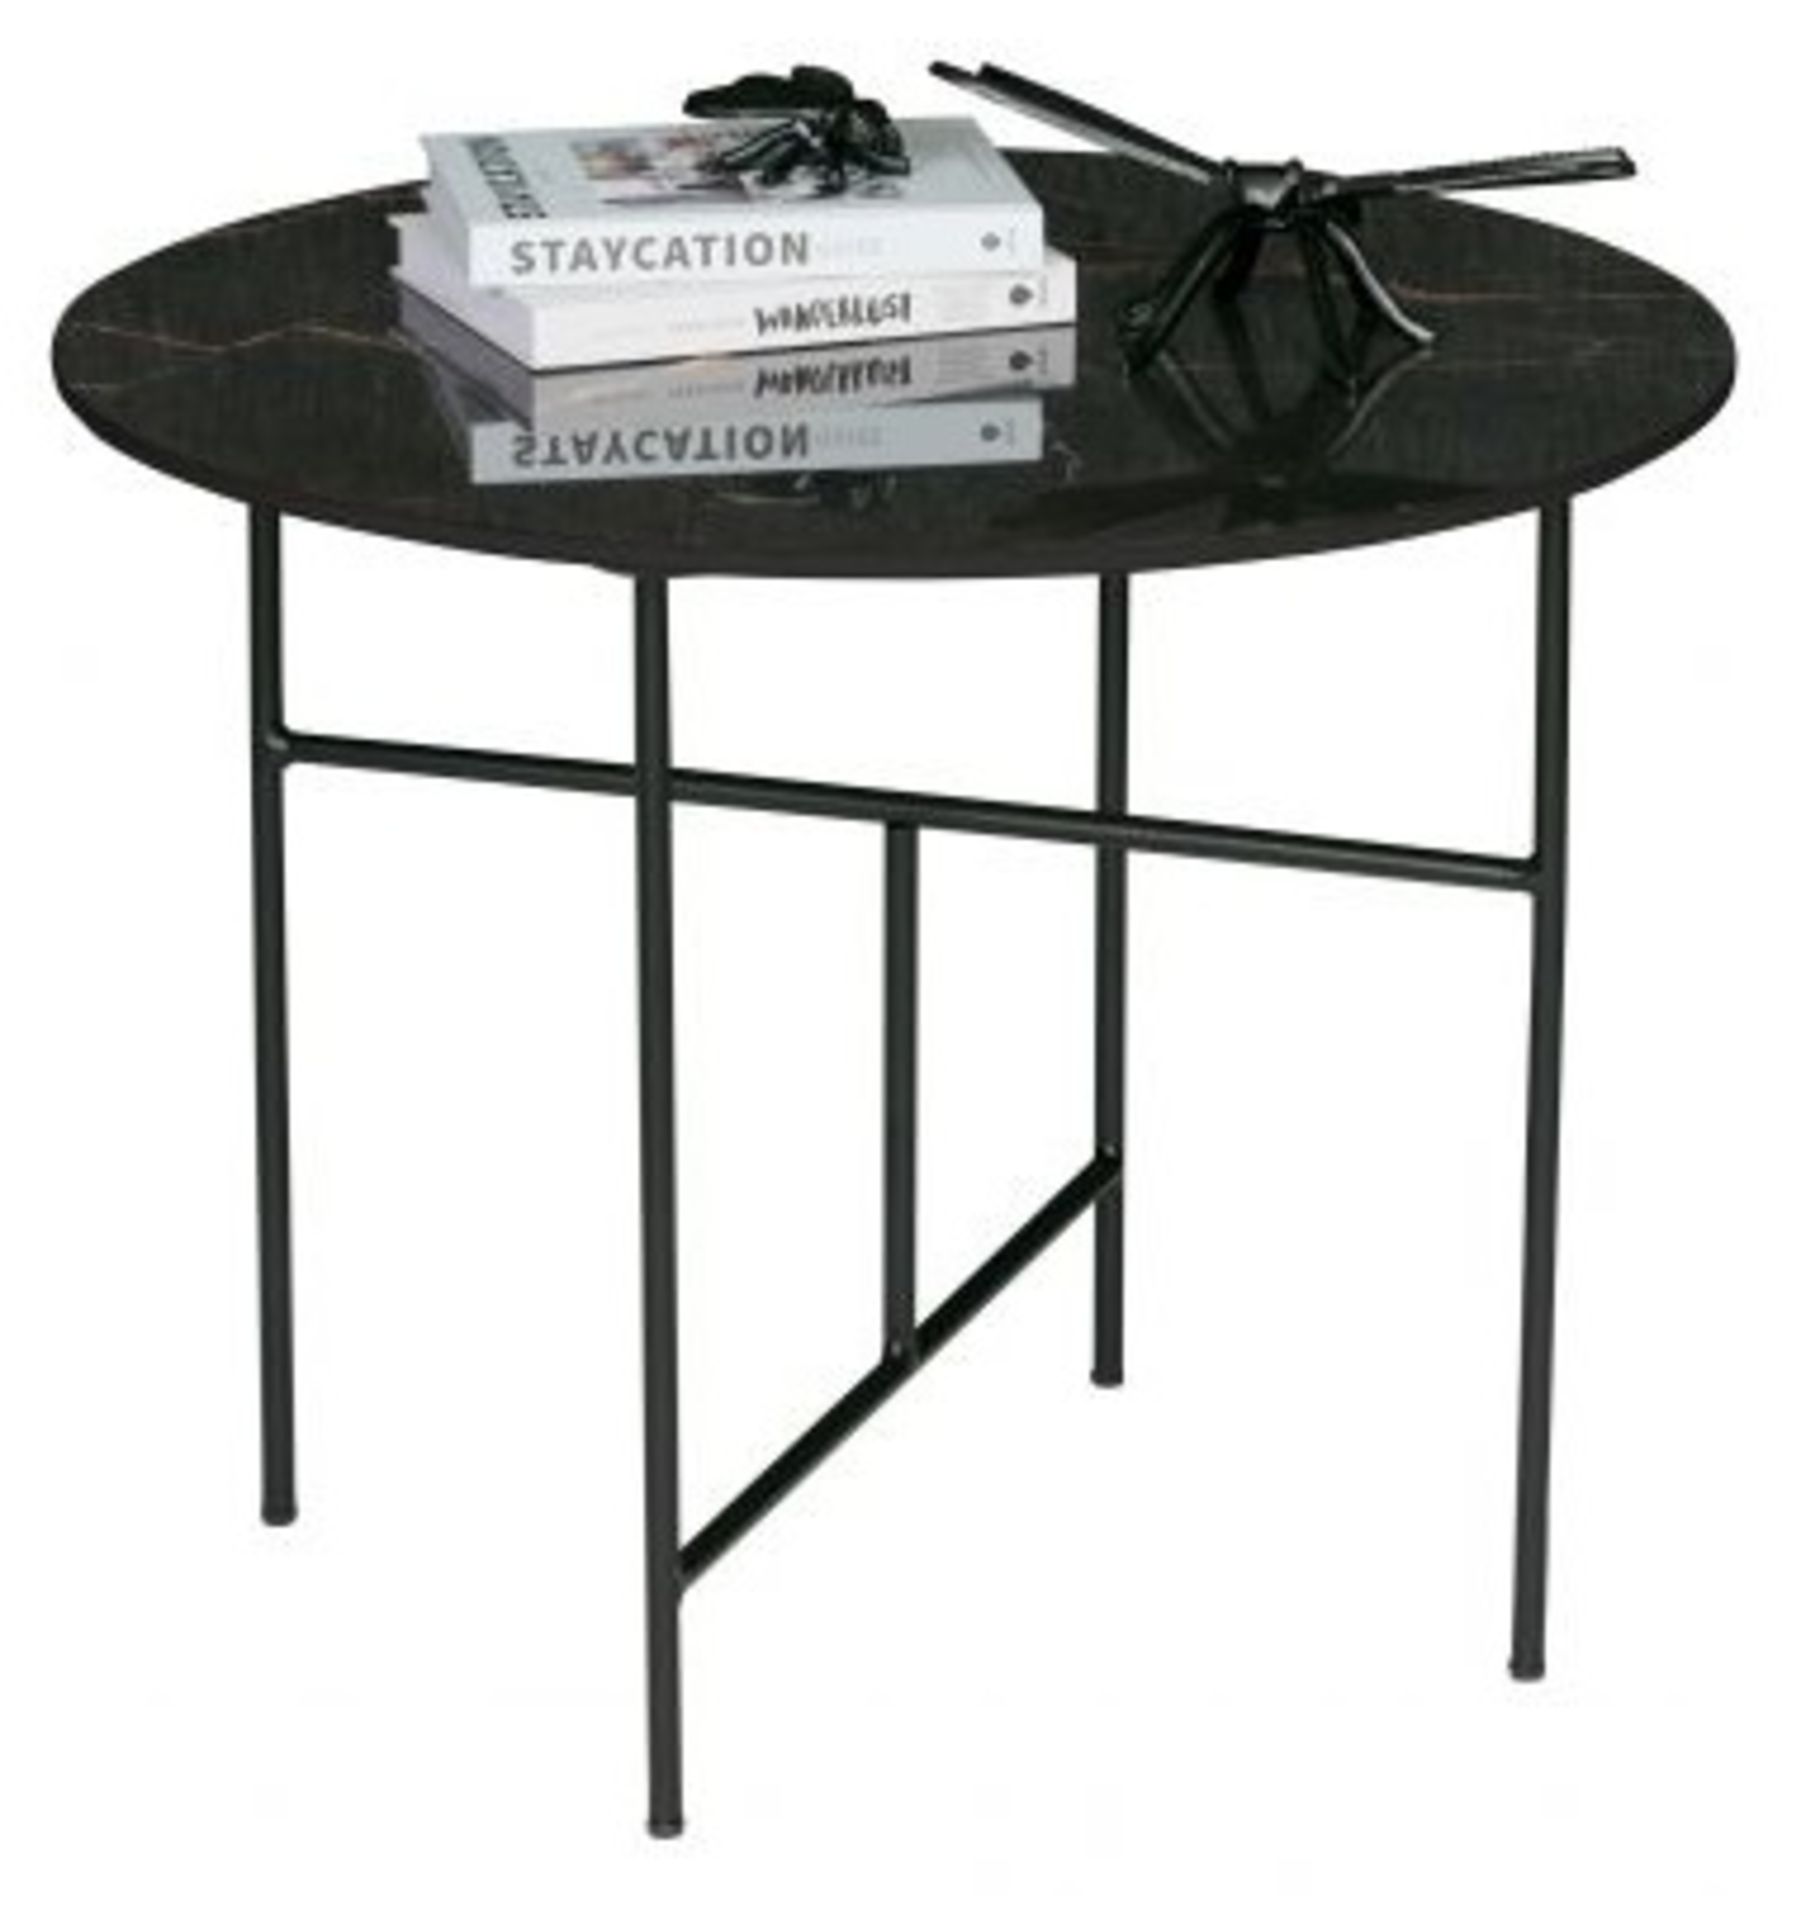 1 x VIDA Modern Round Coffee Table Featuring A Black Marbled Porcelain Tabletop - Produced By - Image 2 of 4